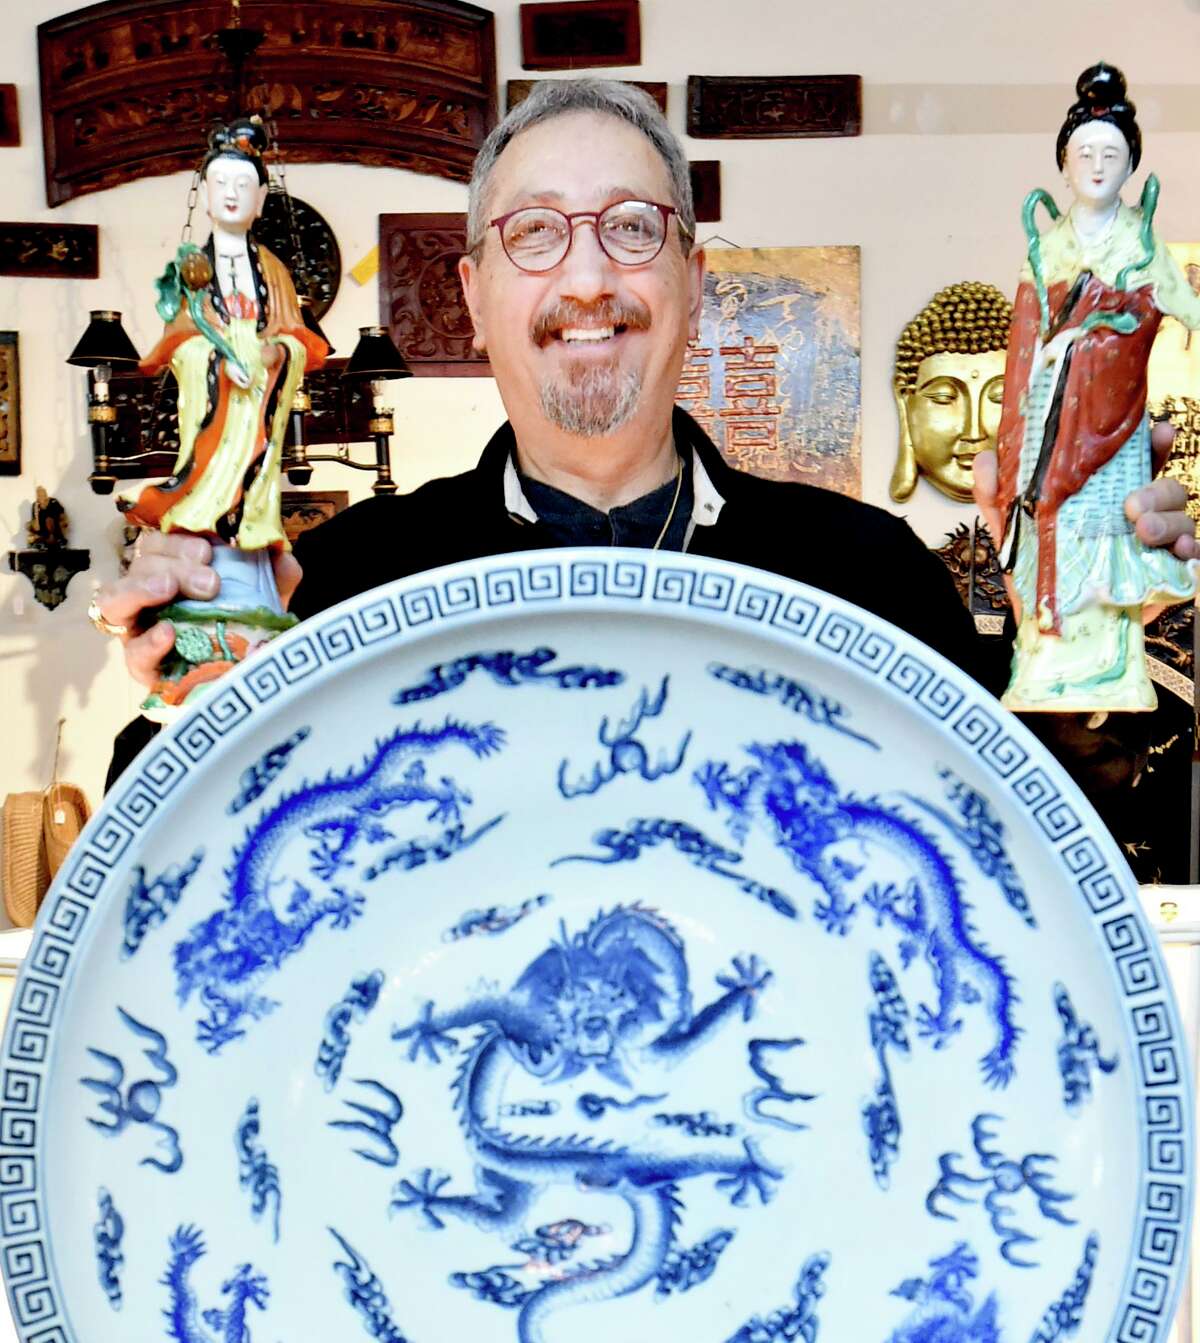 Above, Akil Tanriguden loves Asian history and culture that is inclined to keep very strong traditions alive. His antique shop is organized into the following categories: Shoreline-American; Morrocan-Turkish-Anatolian, Asian, European-Italian, and African with much room made for traditional artwork.